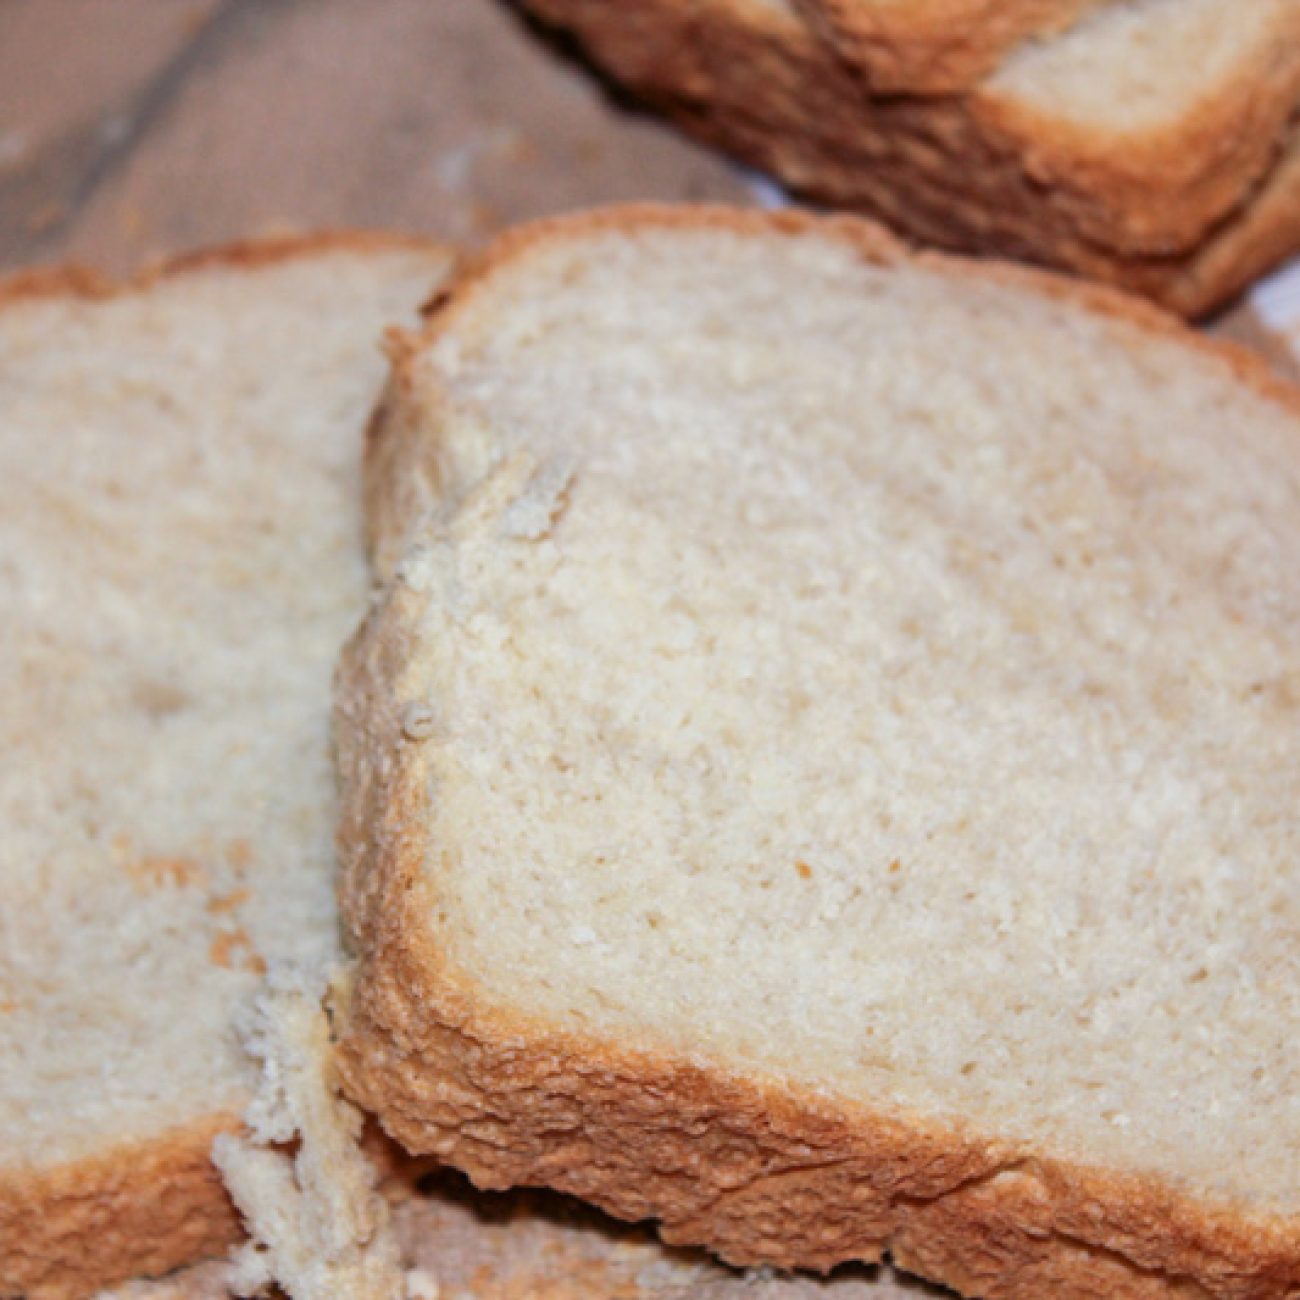 A good white bread which doesn’t crumble when using for sandwiches.